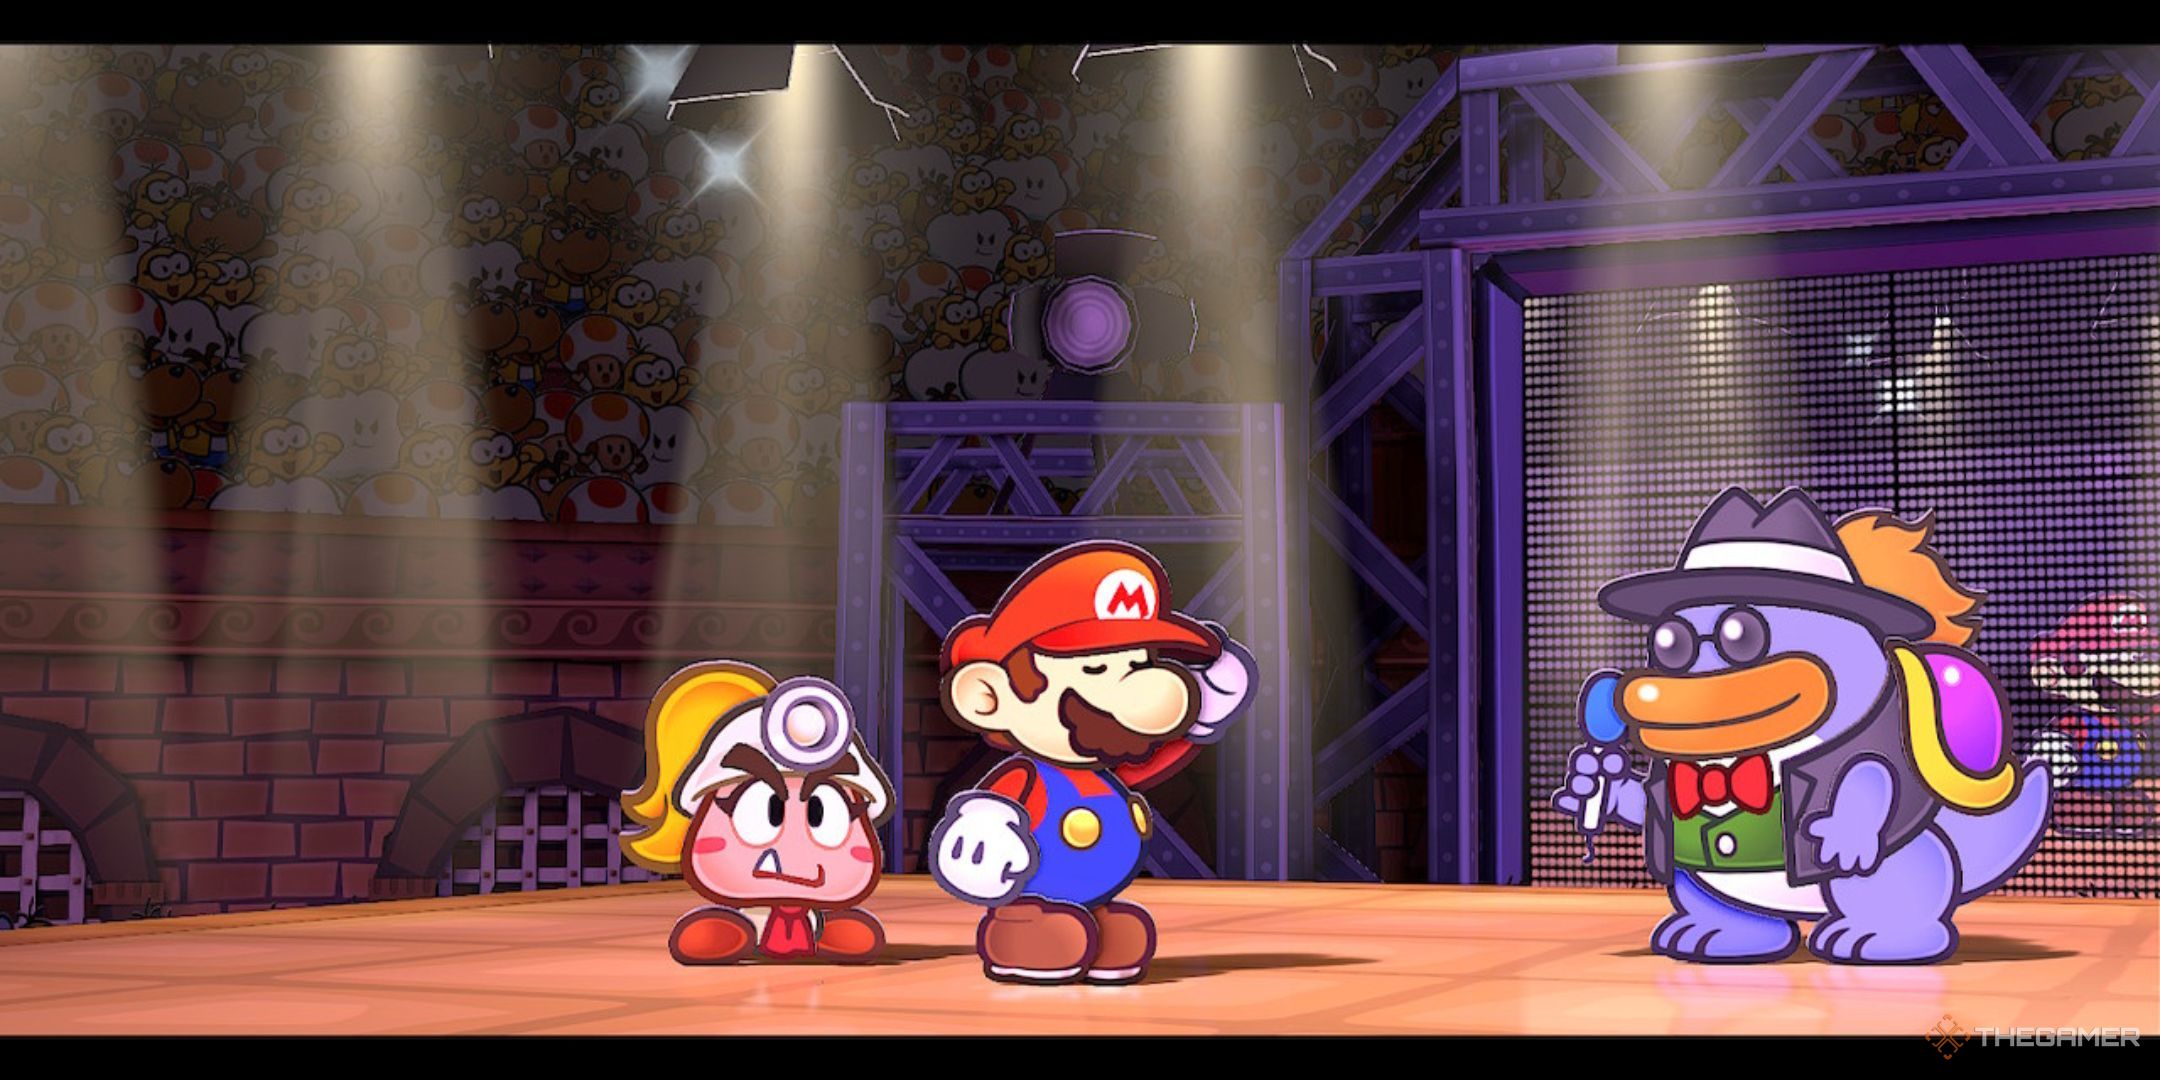 Mario and Goombella on stage after a victory in the Glitz Pit in Paper Mario: The Thousand-Year Door.